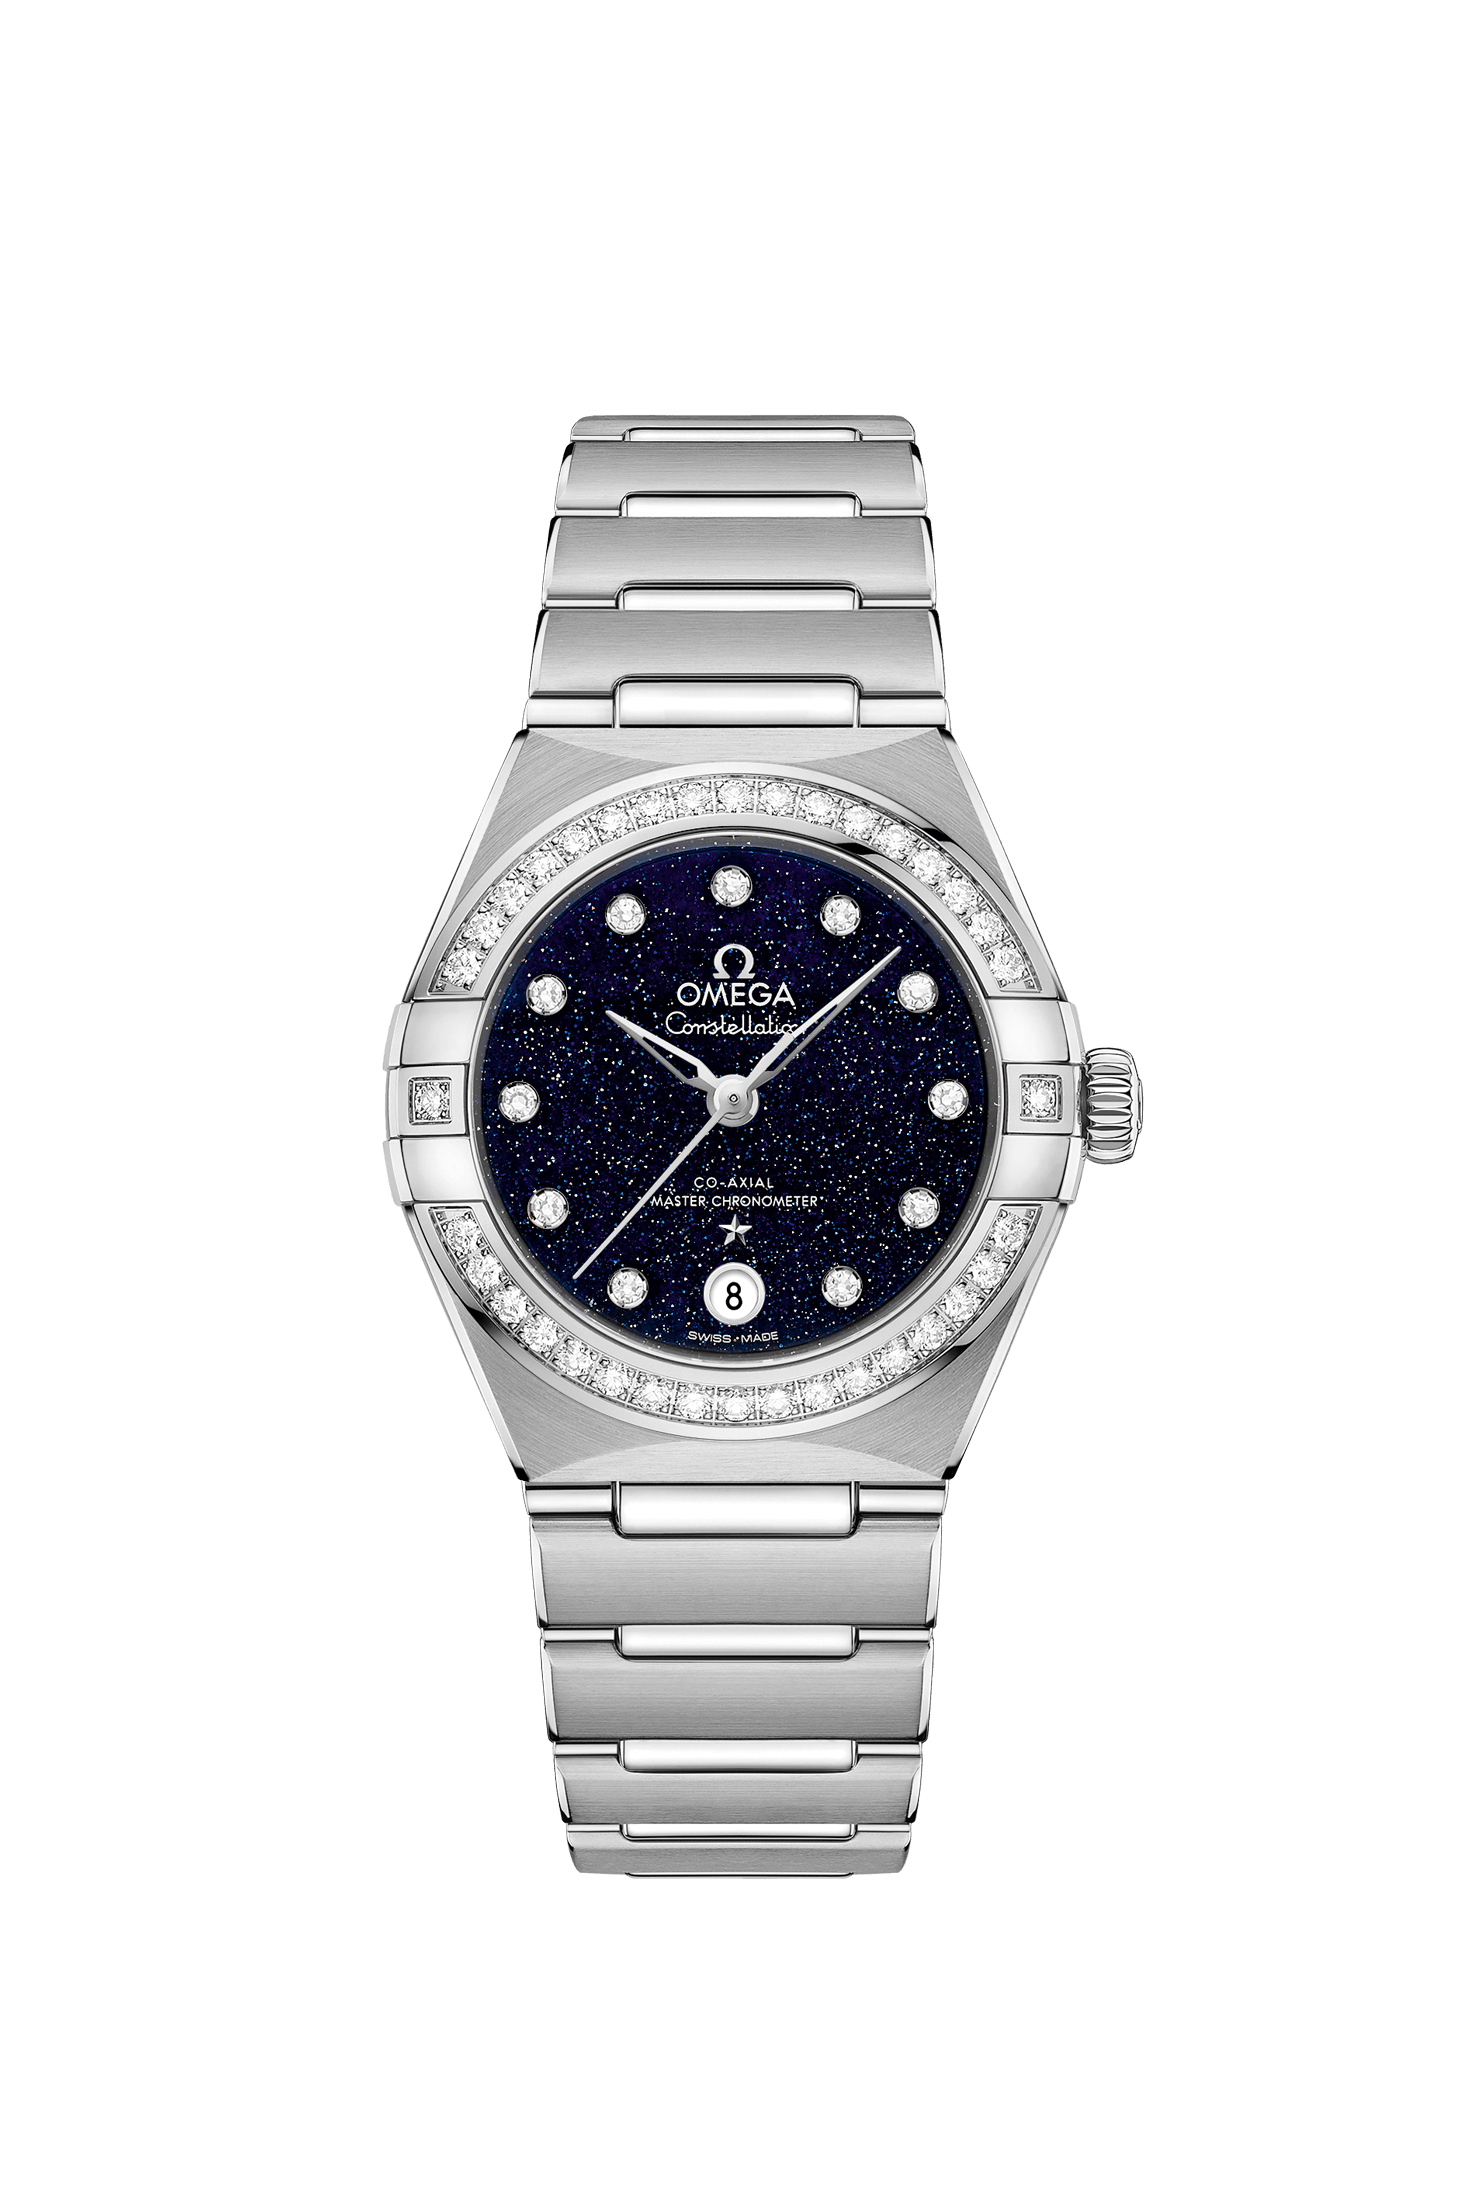 Ladies' watch  OMEGA, Constellation Co Axial Master Chronometer / 29mm, SKU: 131.15.29.20.53.001 | watchapproach.com